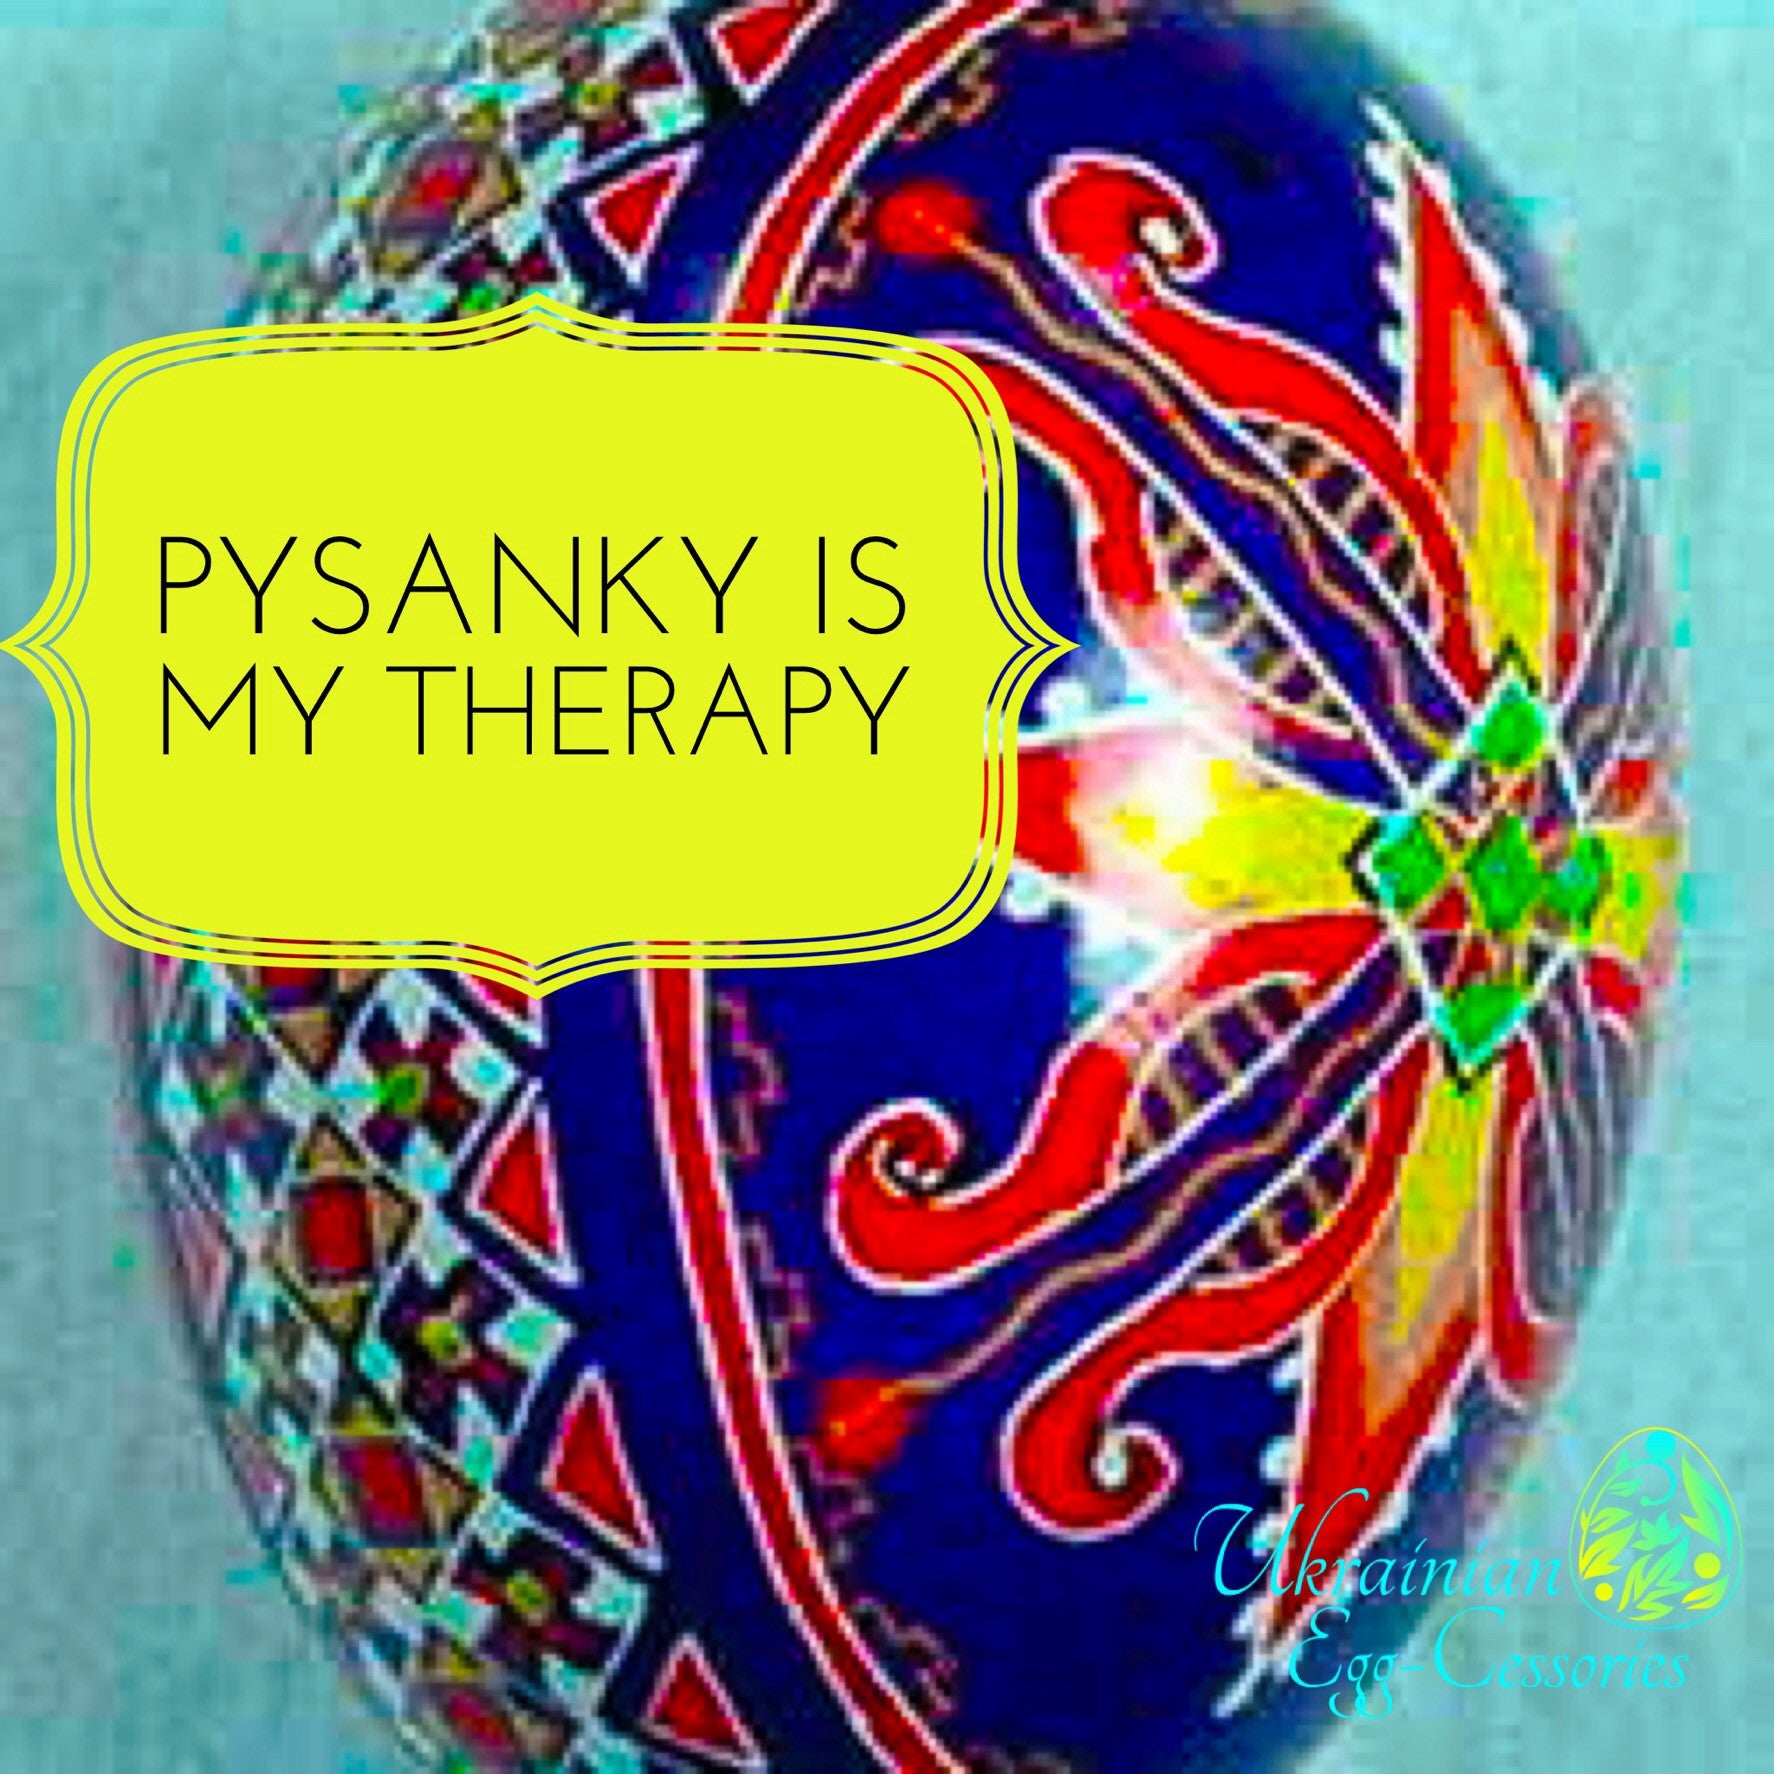 Pysanky is My Therapy